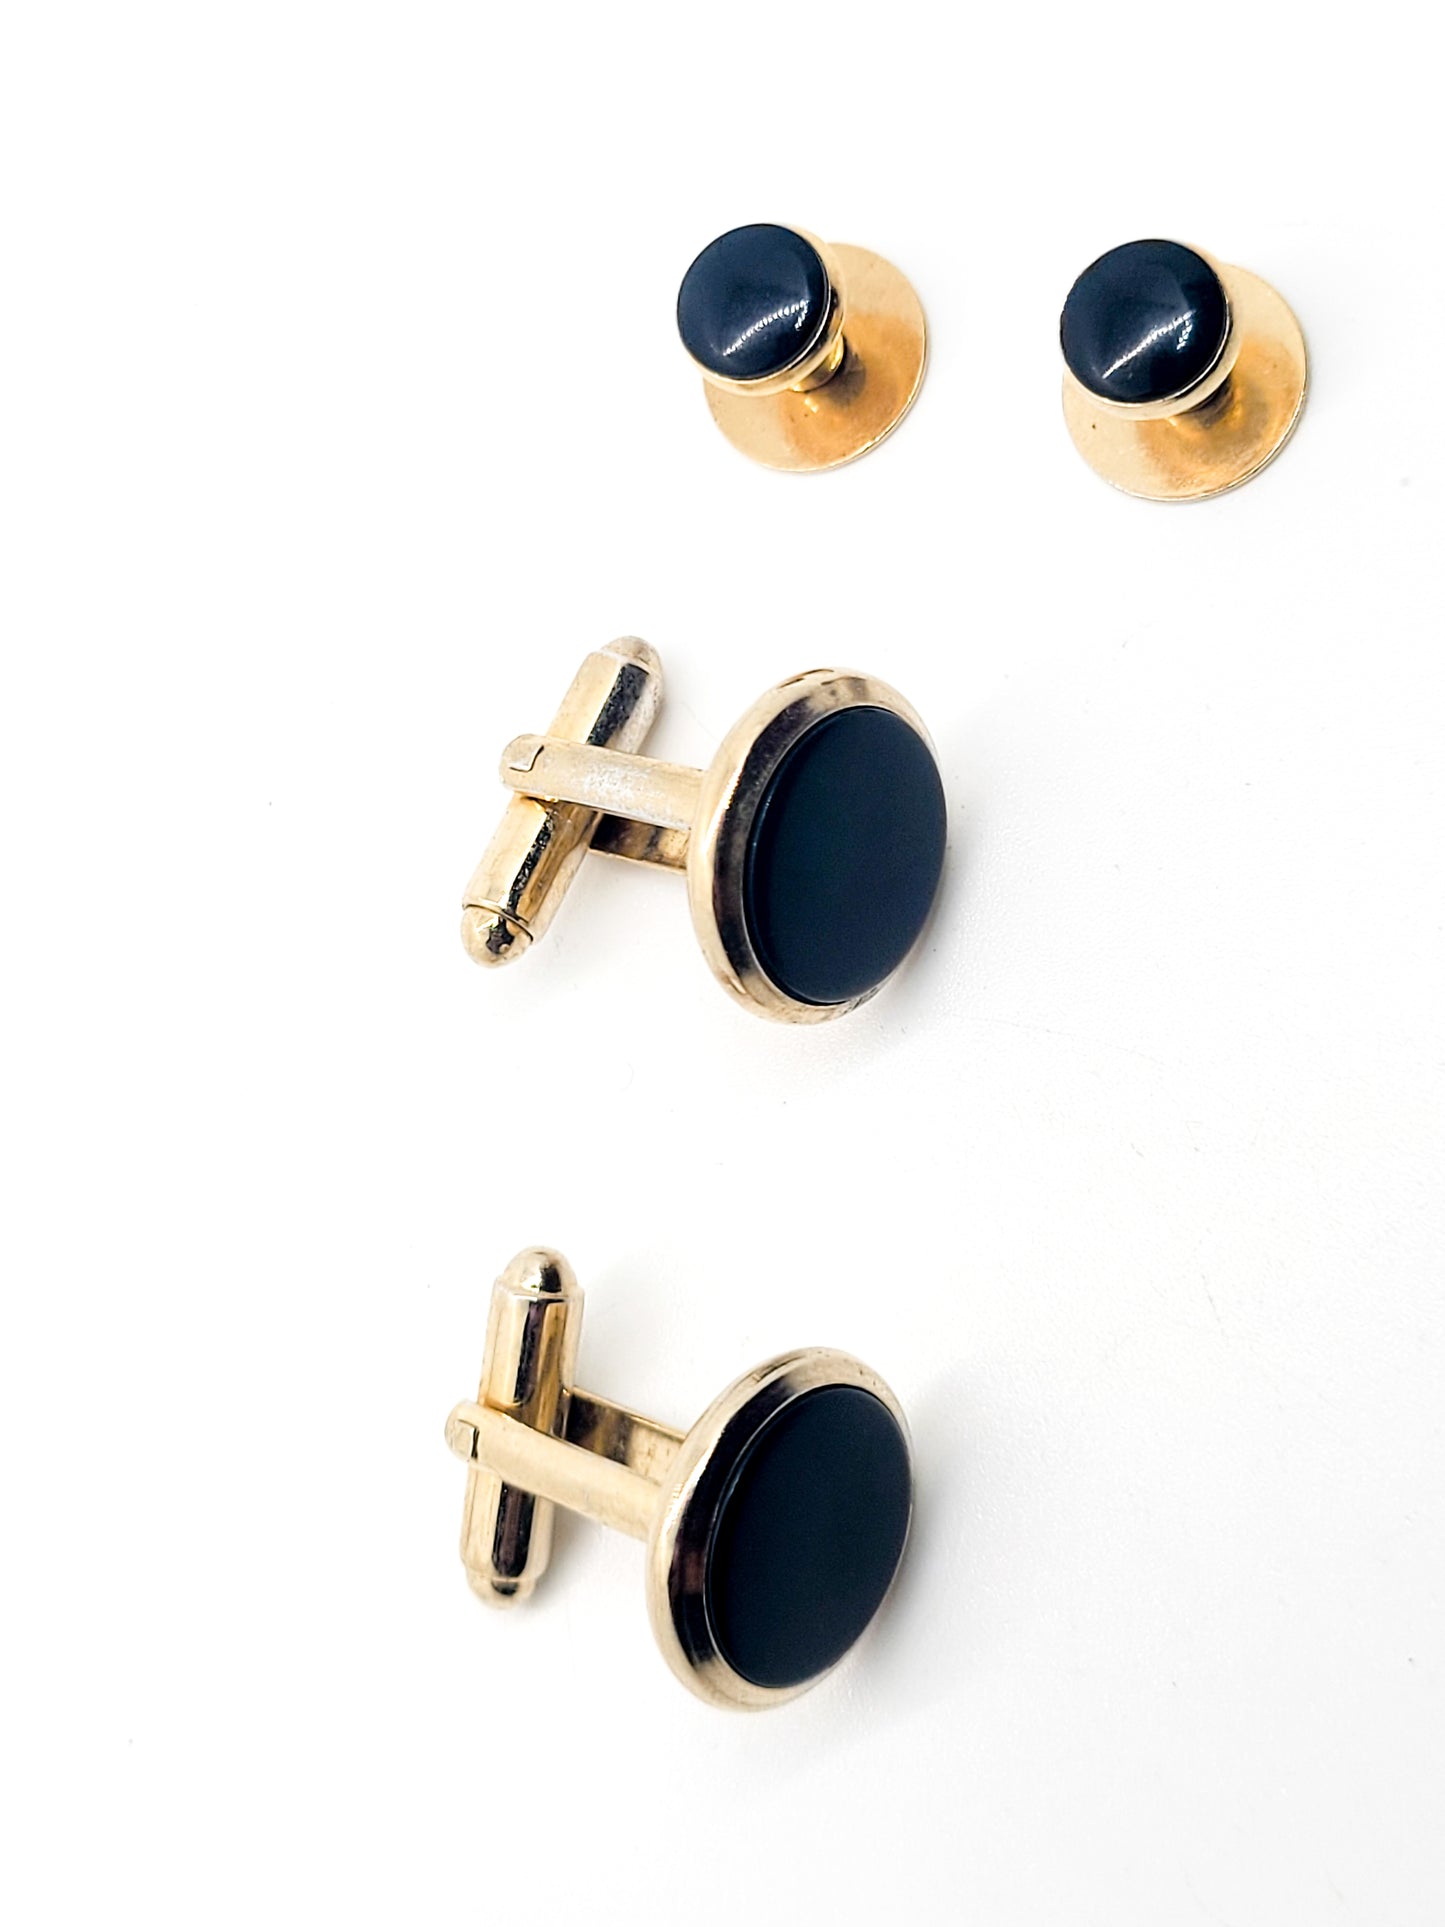 Sheild's black and gold cufflink and collar stud vintage signed set